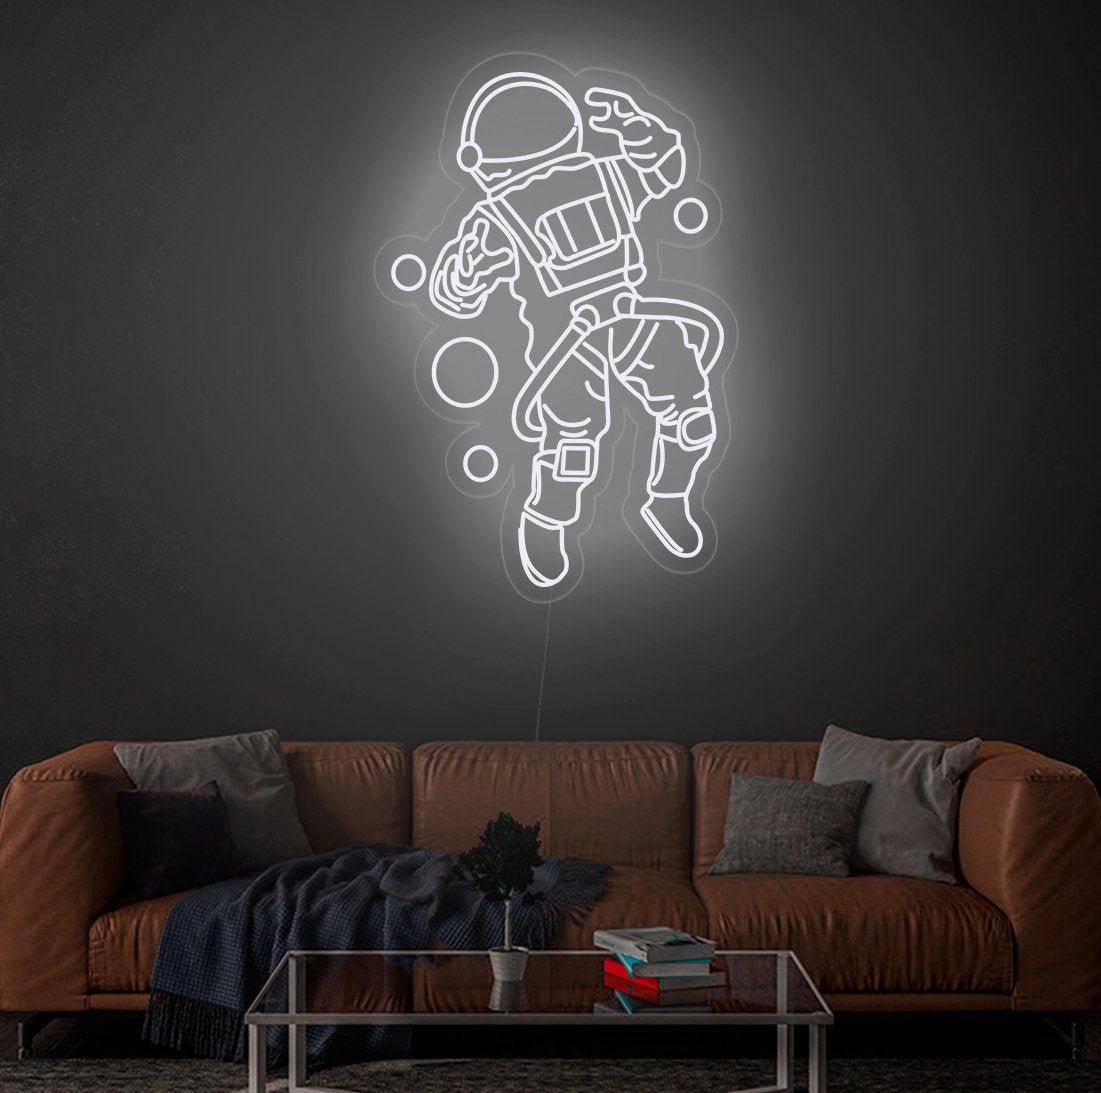 Astronaut - LED Neon Sign, Neon Sign ART For Home, Neon Wall Signs, Home Decor